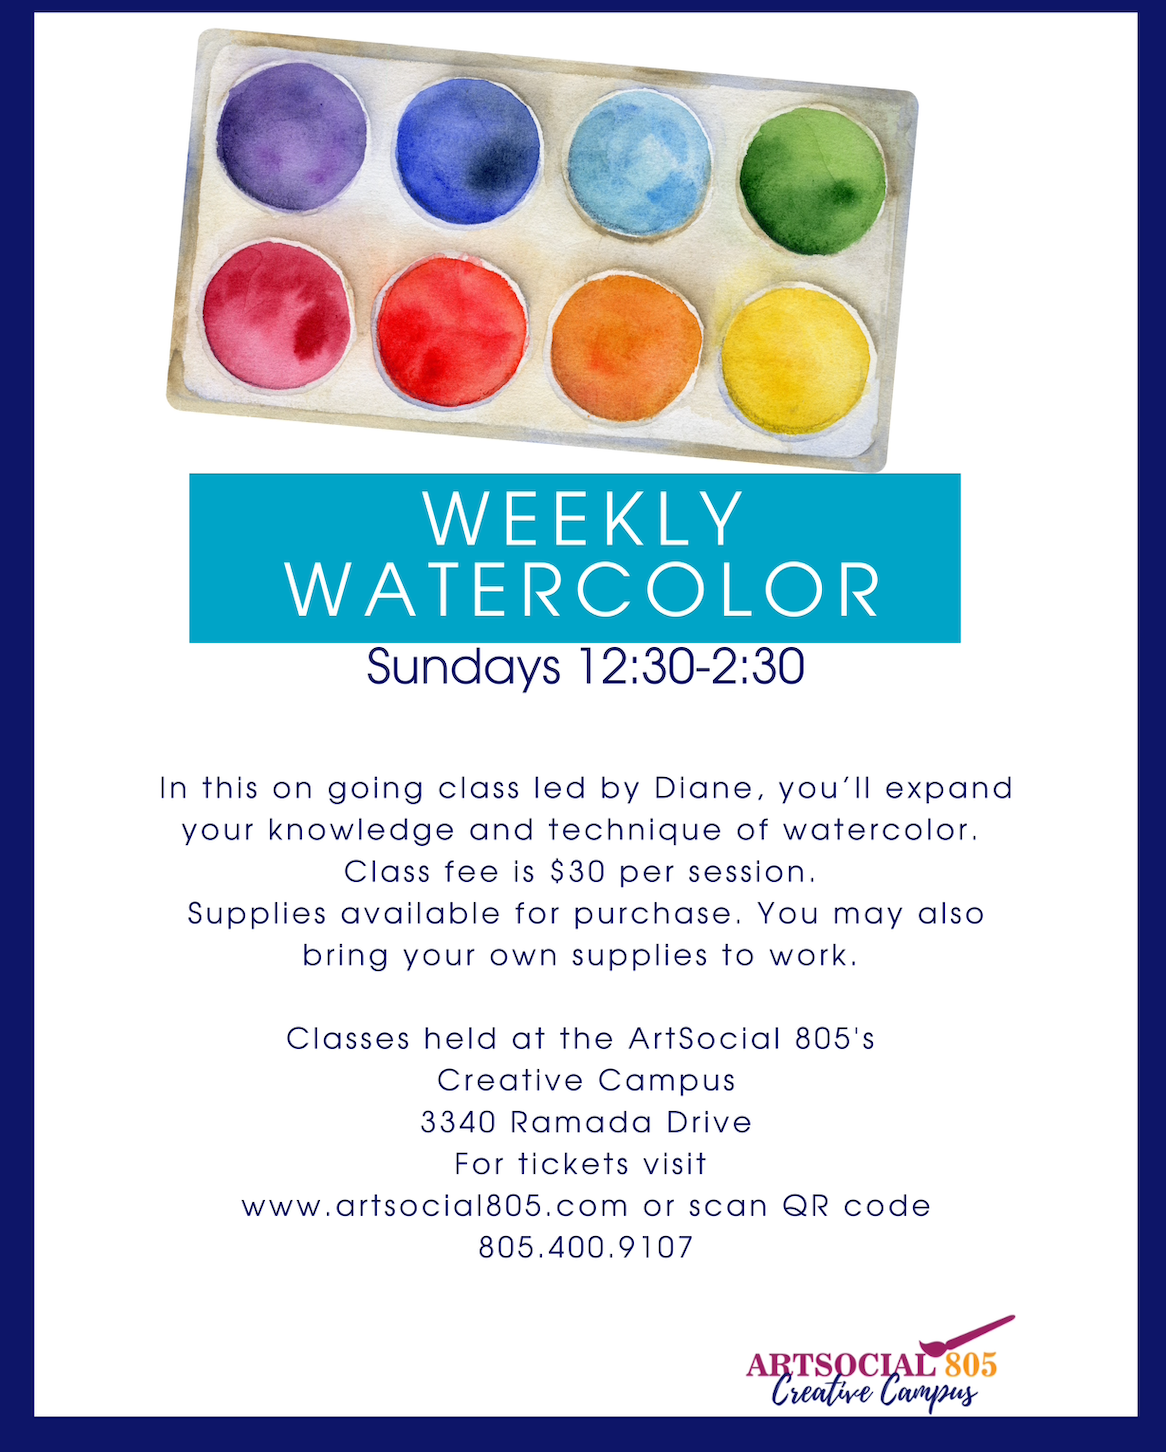 Weekly Watercolor sessions at Creative Campus!